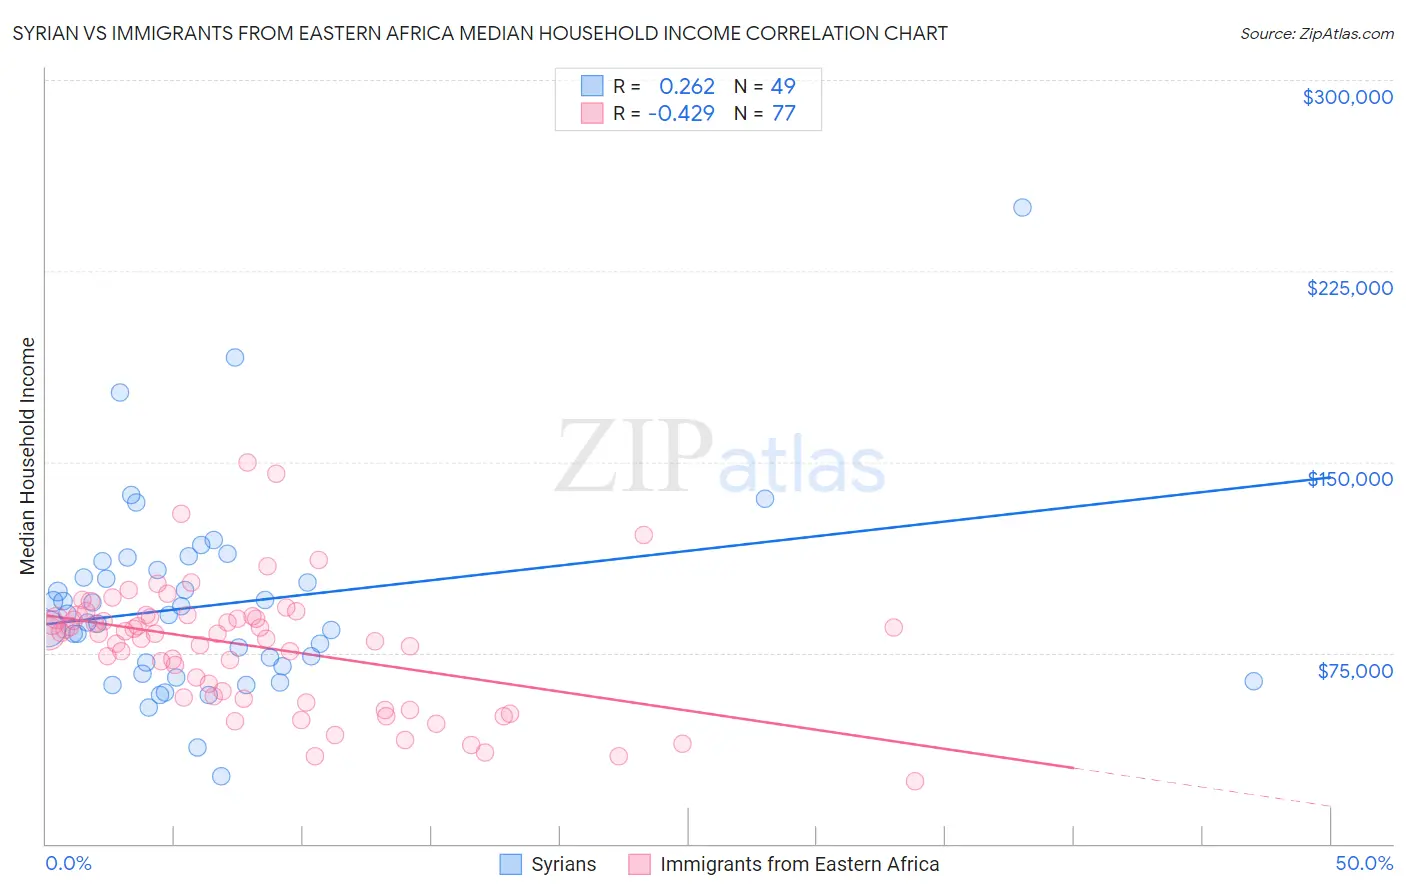 Syrian vs Immigrants from Eastern Africa Median Household Income